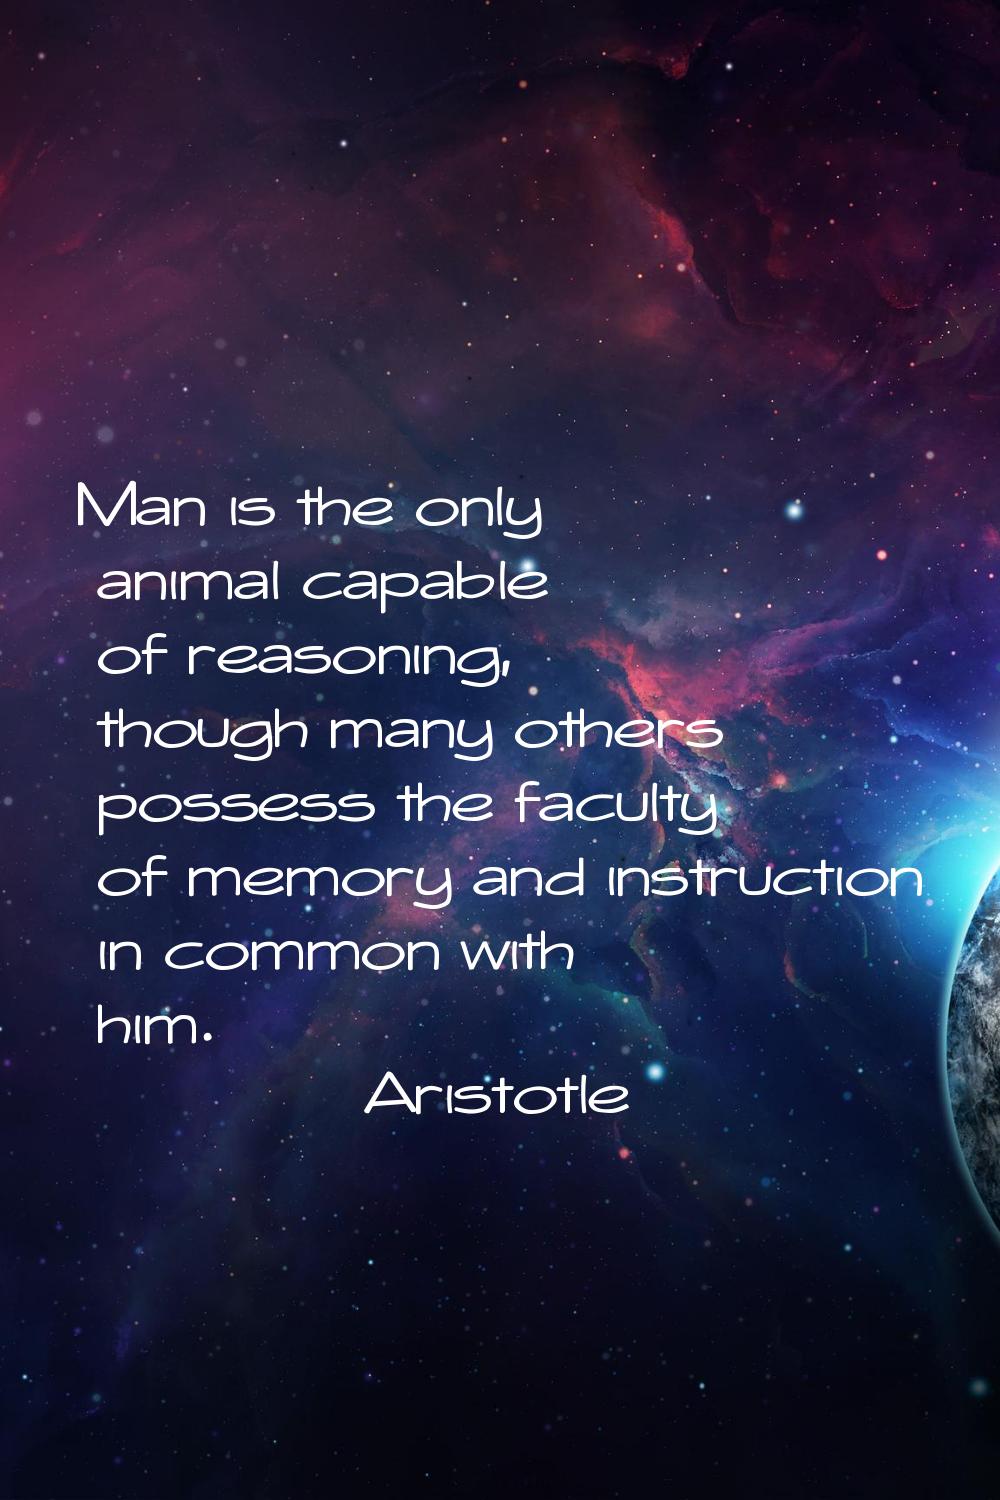 Man is the only animal capable of reasoning, though many others possess the faculty of memory and i